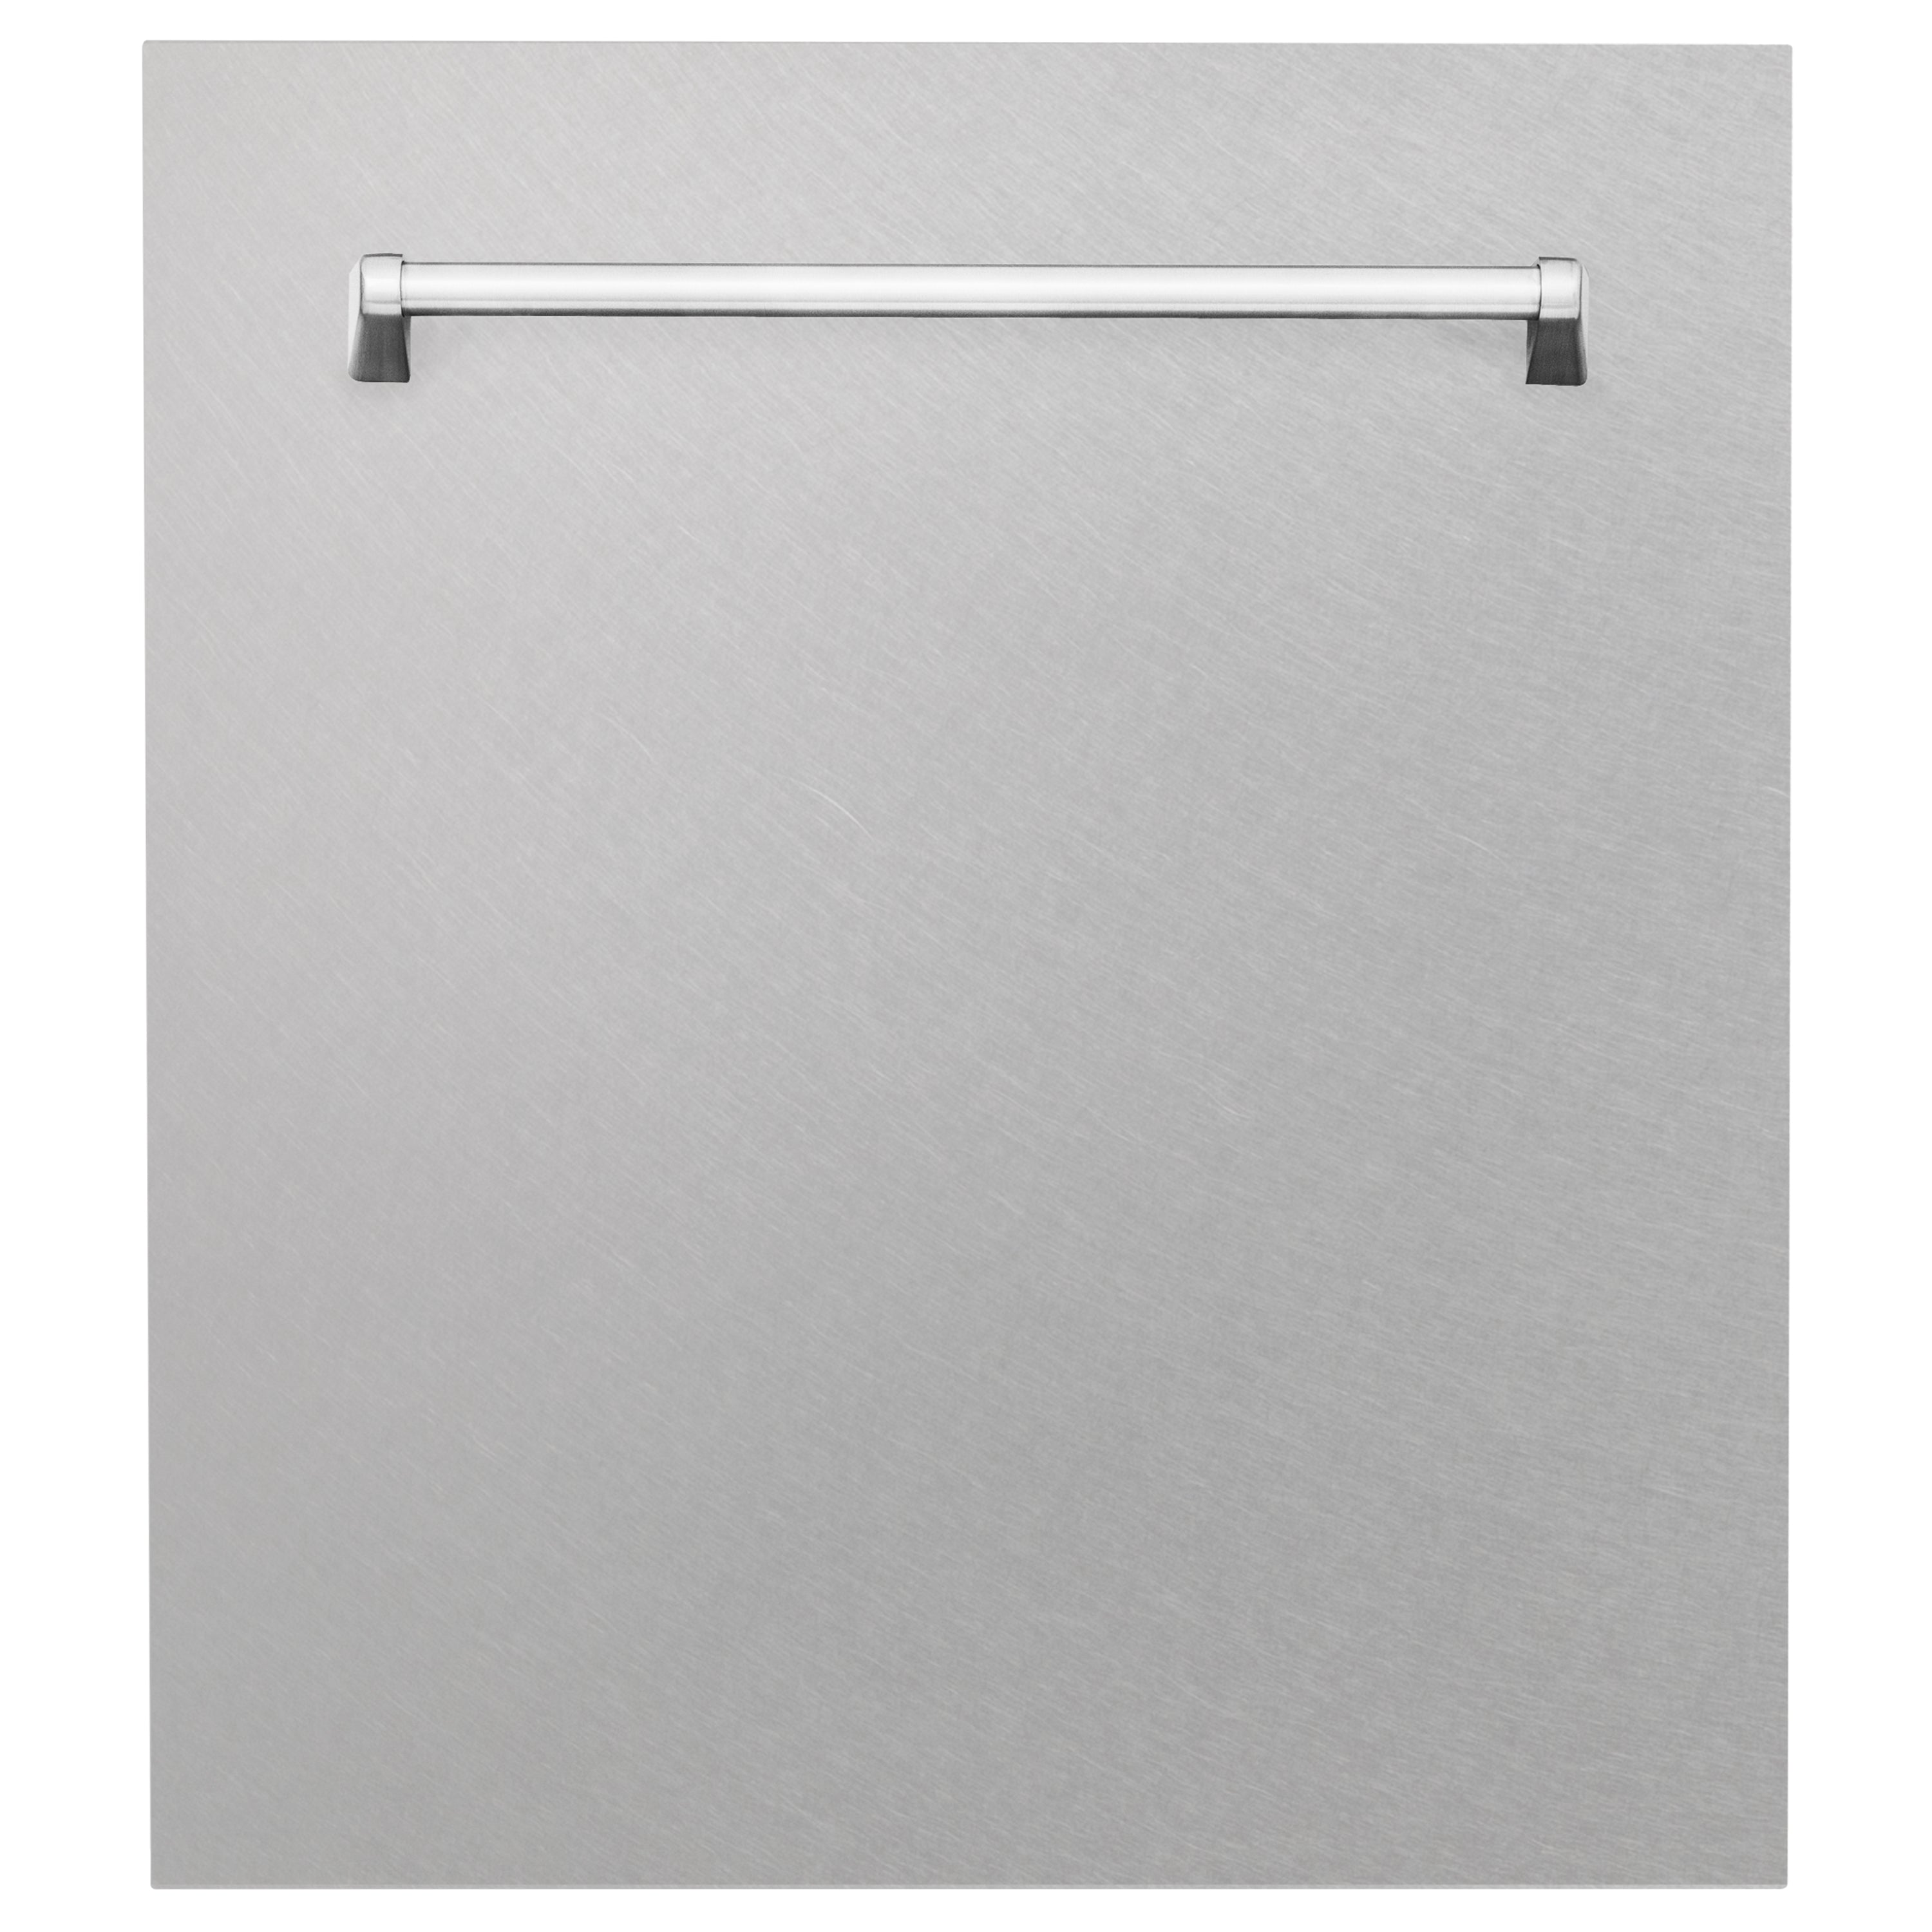 ZLINE 24" Tallac Dishwasher Panel in Fingerprint Resistant Stainless Steel with Traditional Handle (DPV-SN-24)